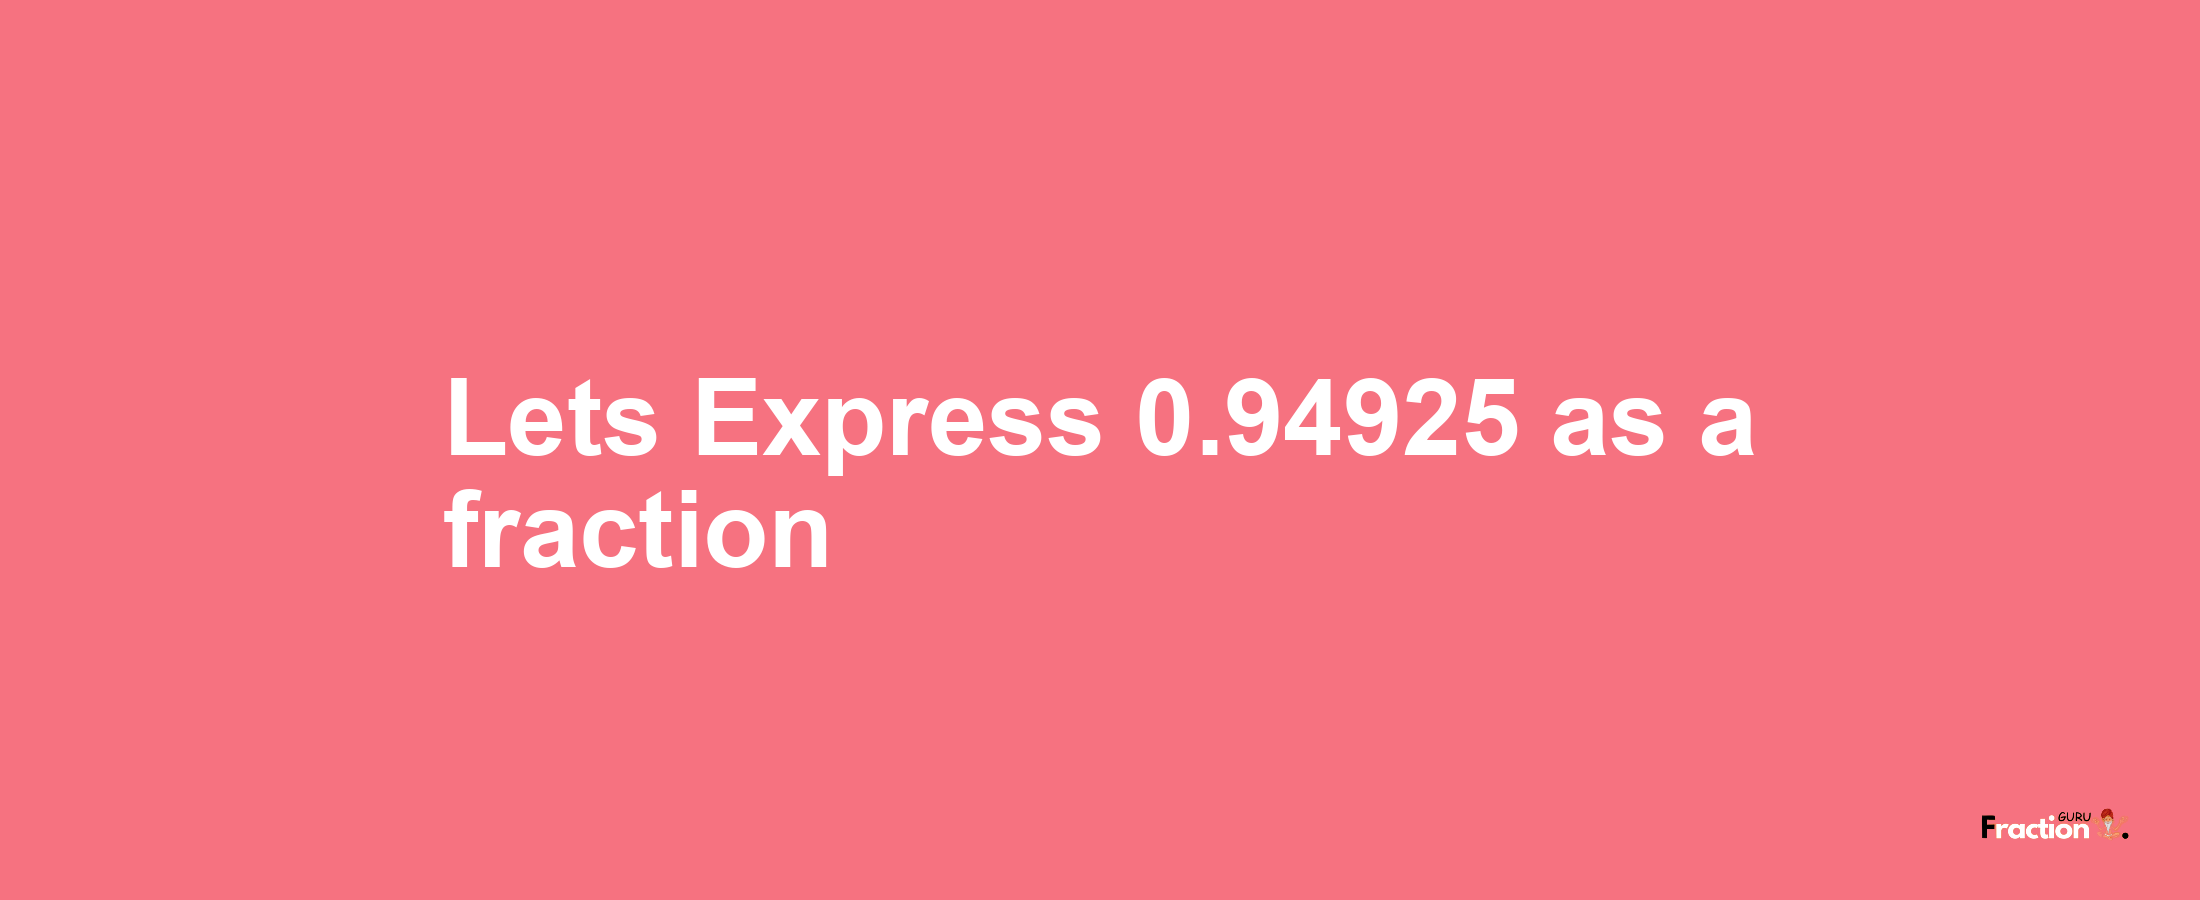 Lets Express 0.94925 as afraction